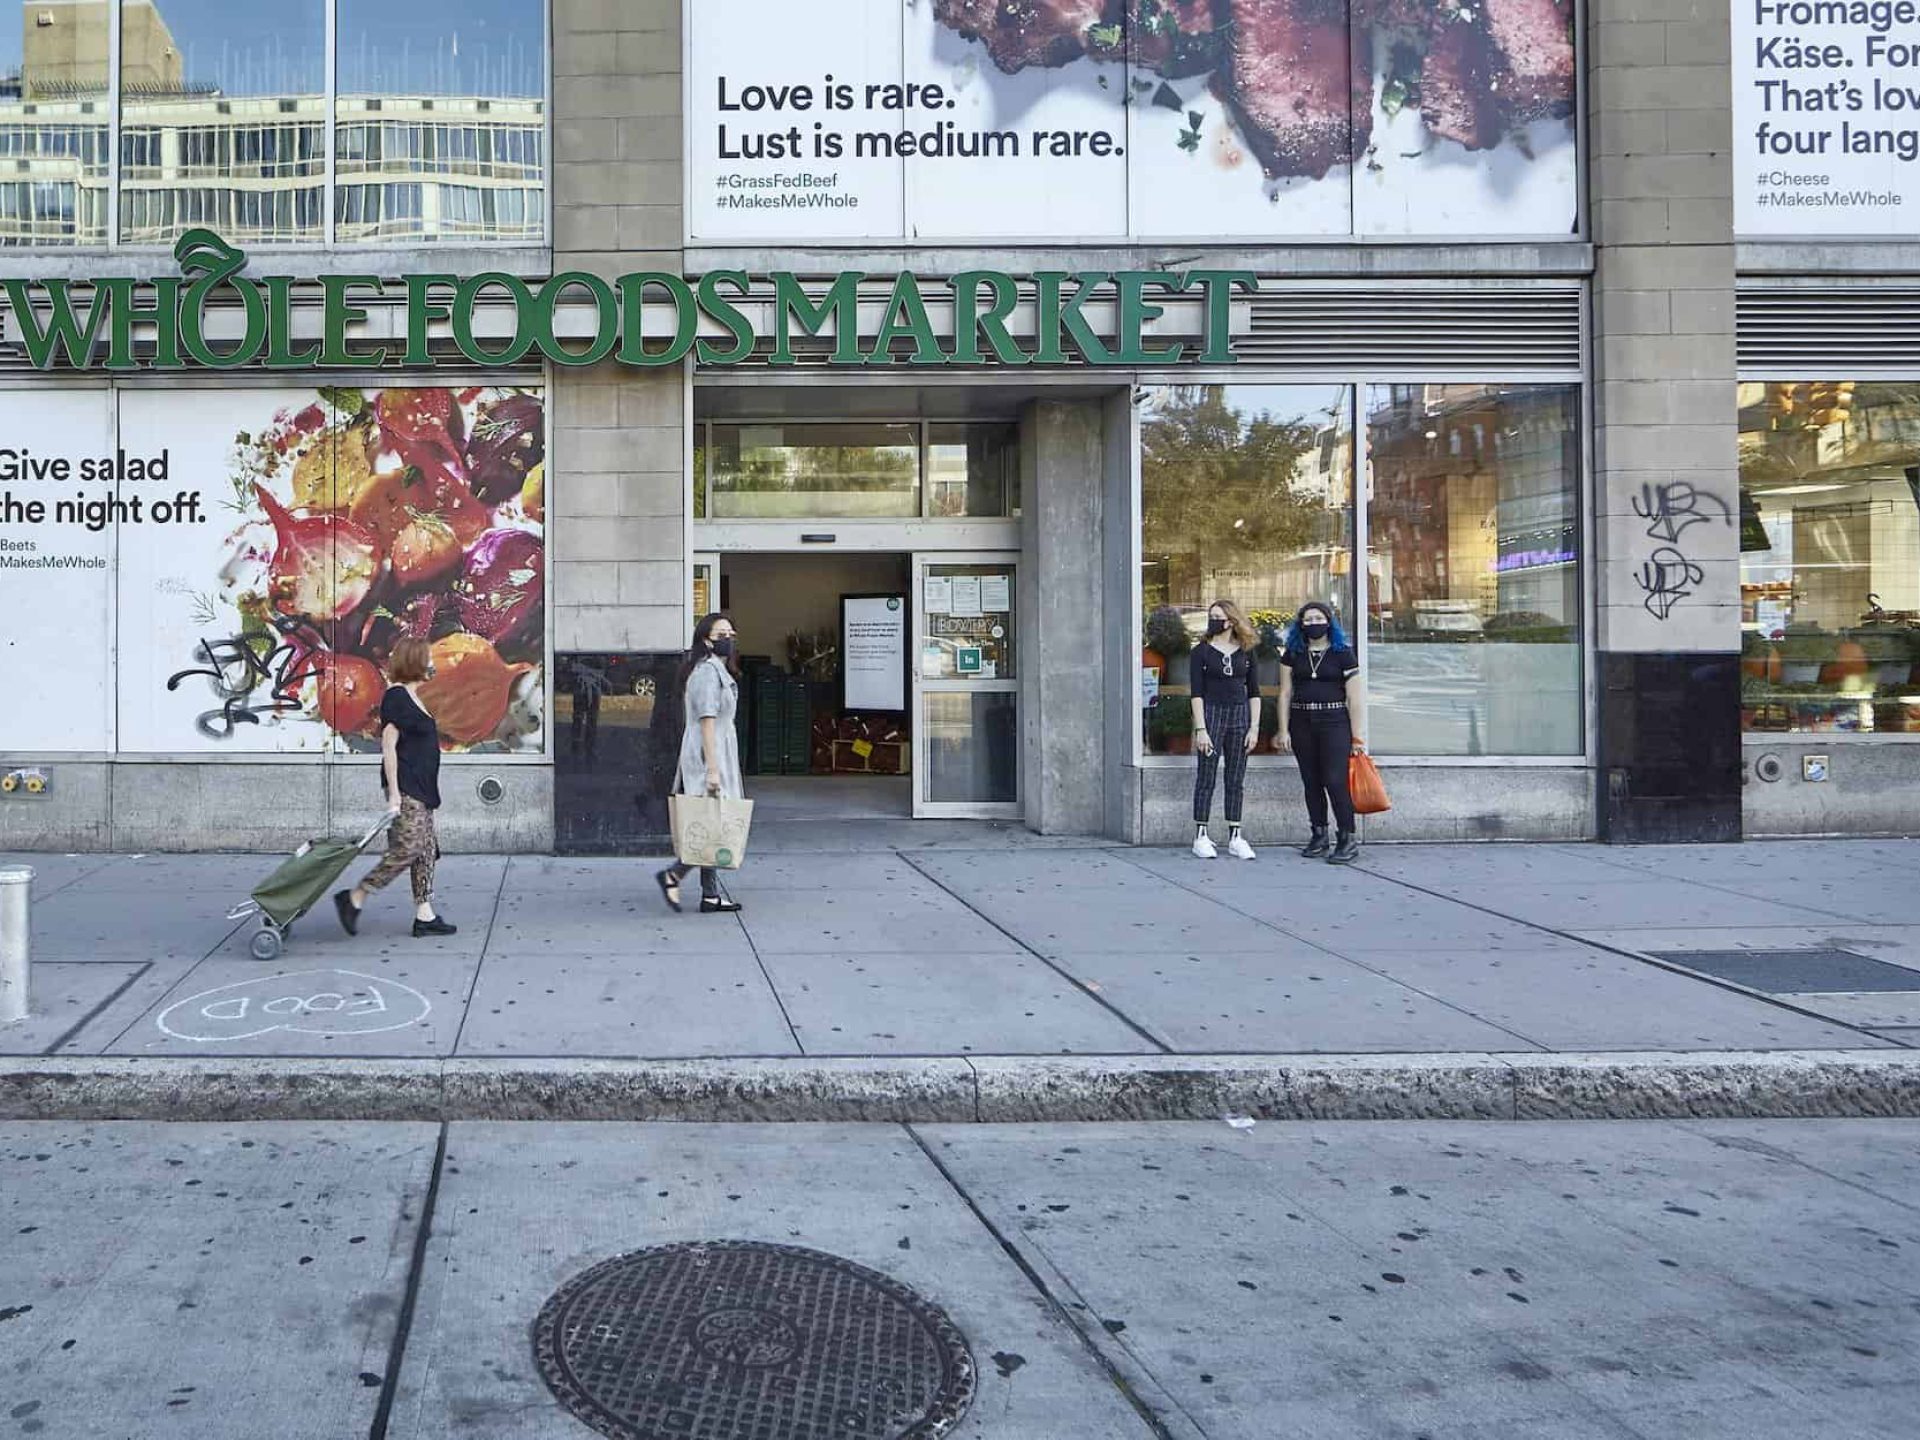 Street view of entrance to Whole Foods Market in Noho. Open sliding door with people standing and walking outside.